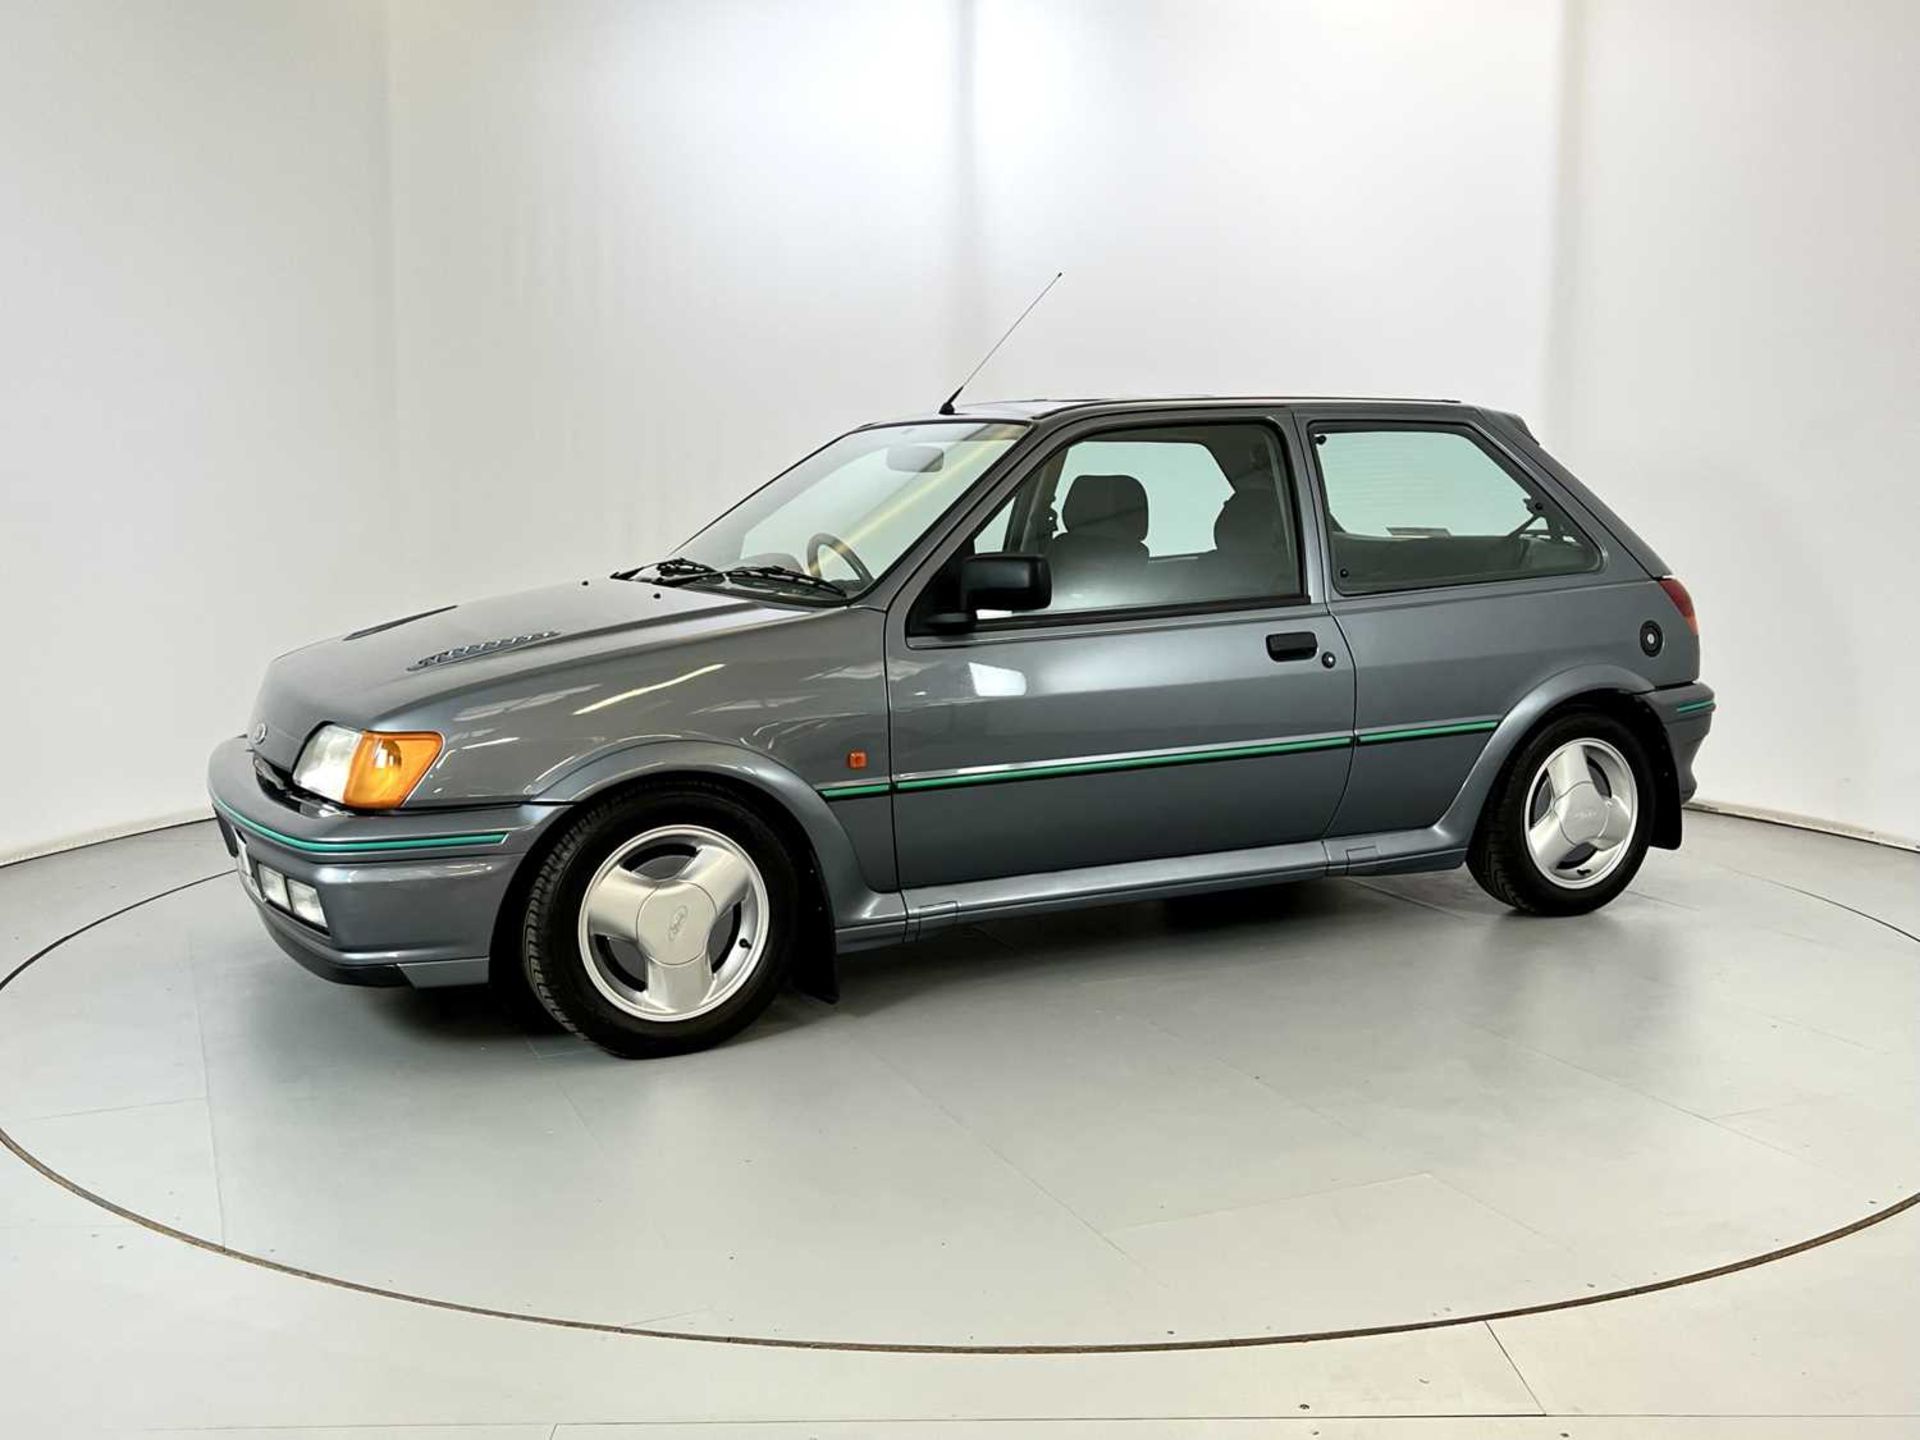 1991 Ford Fiesta RS Turbo - Image 4 of 32